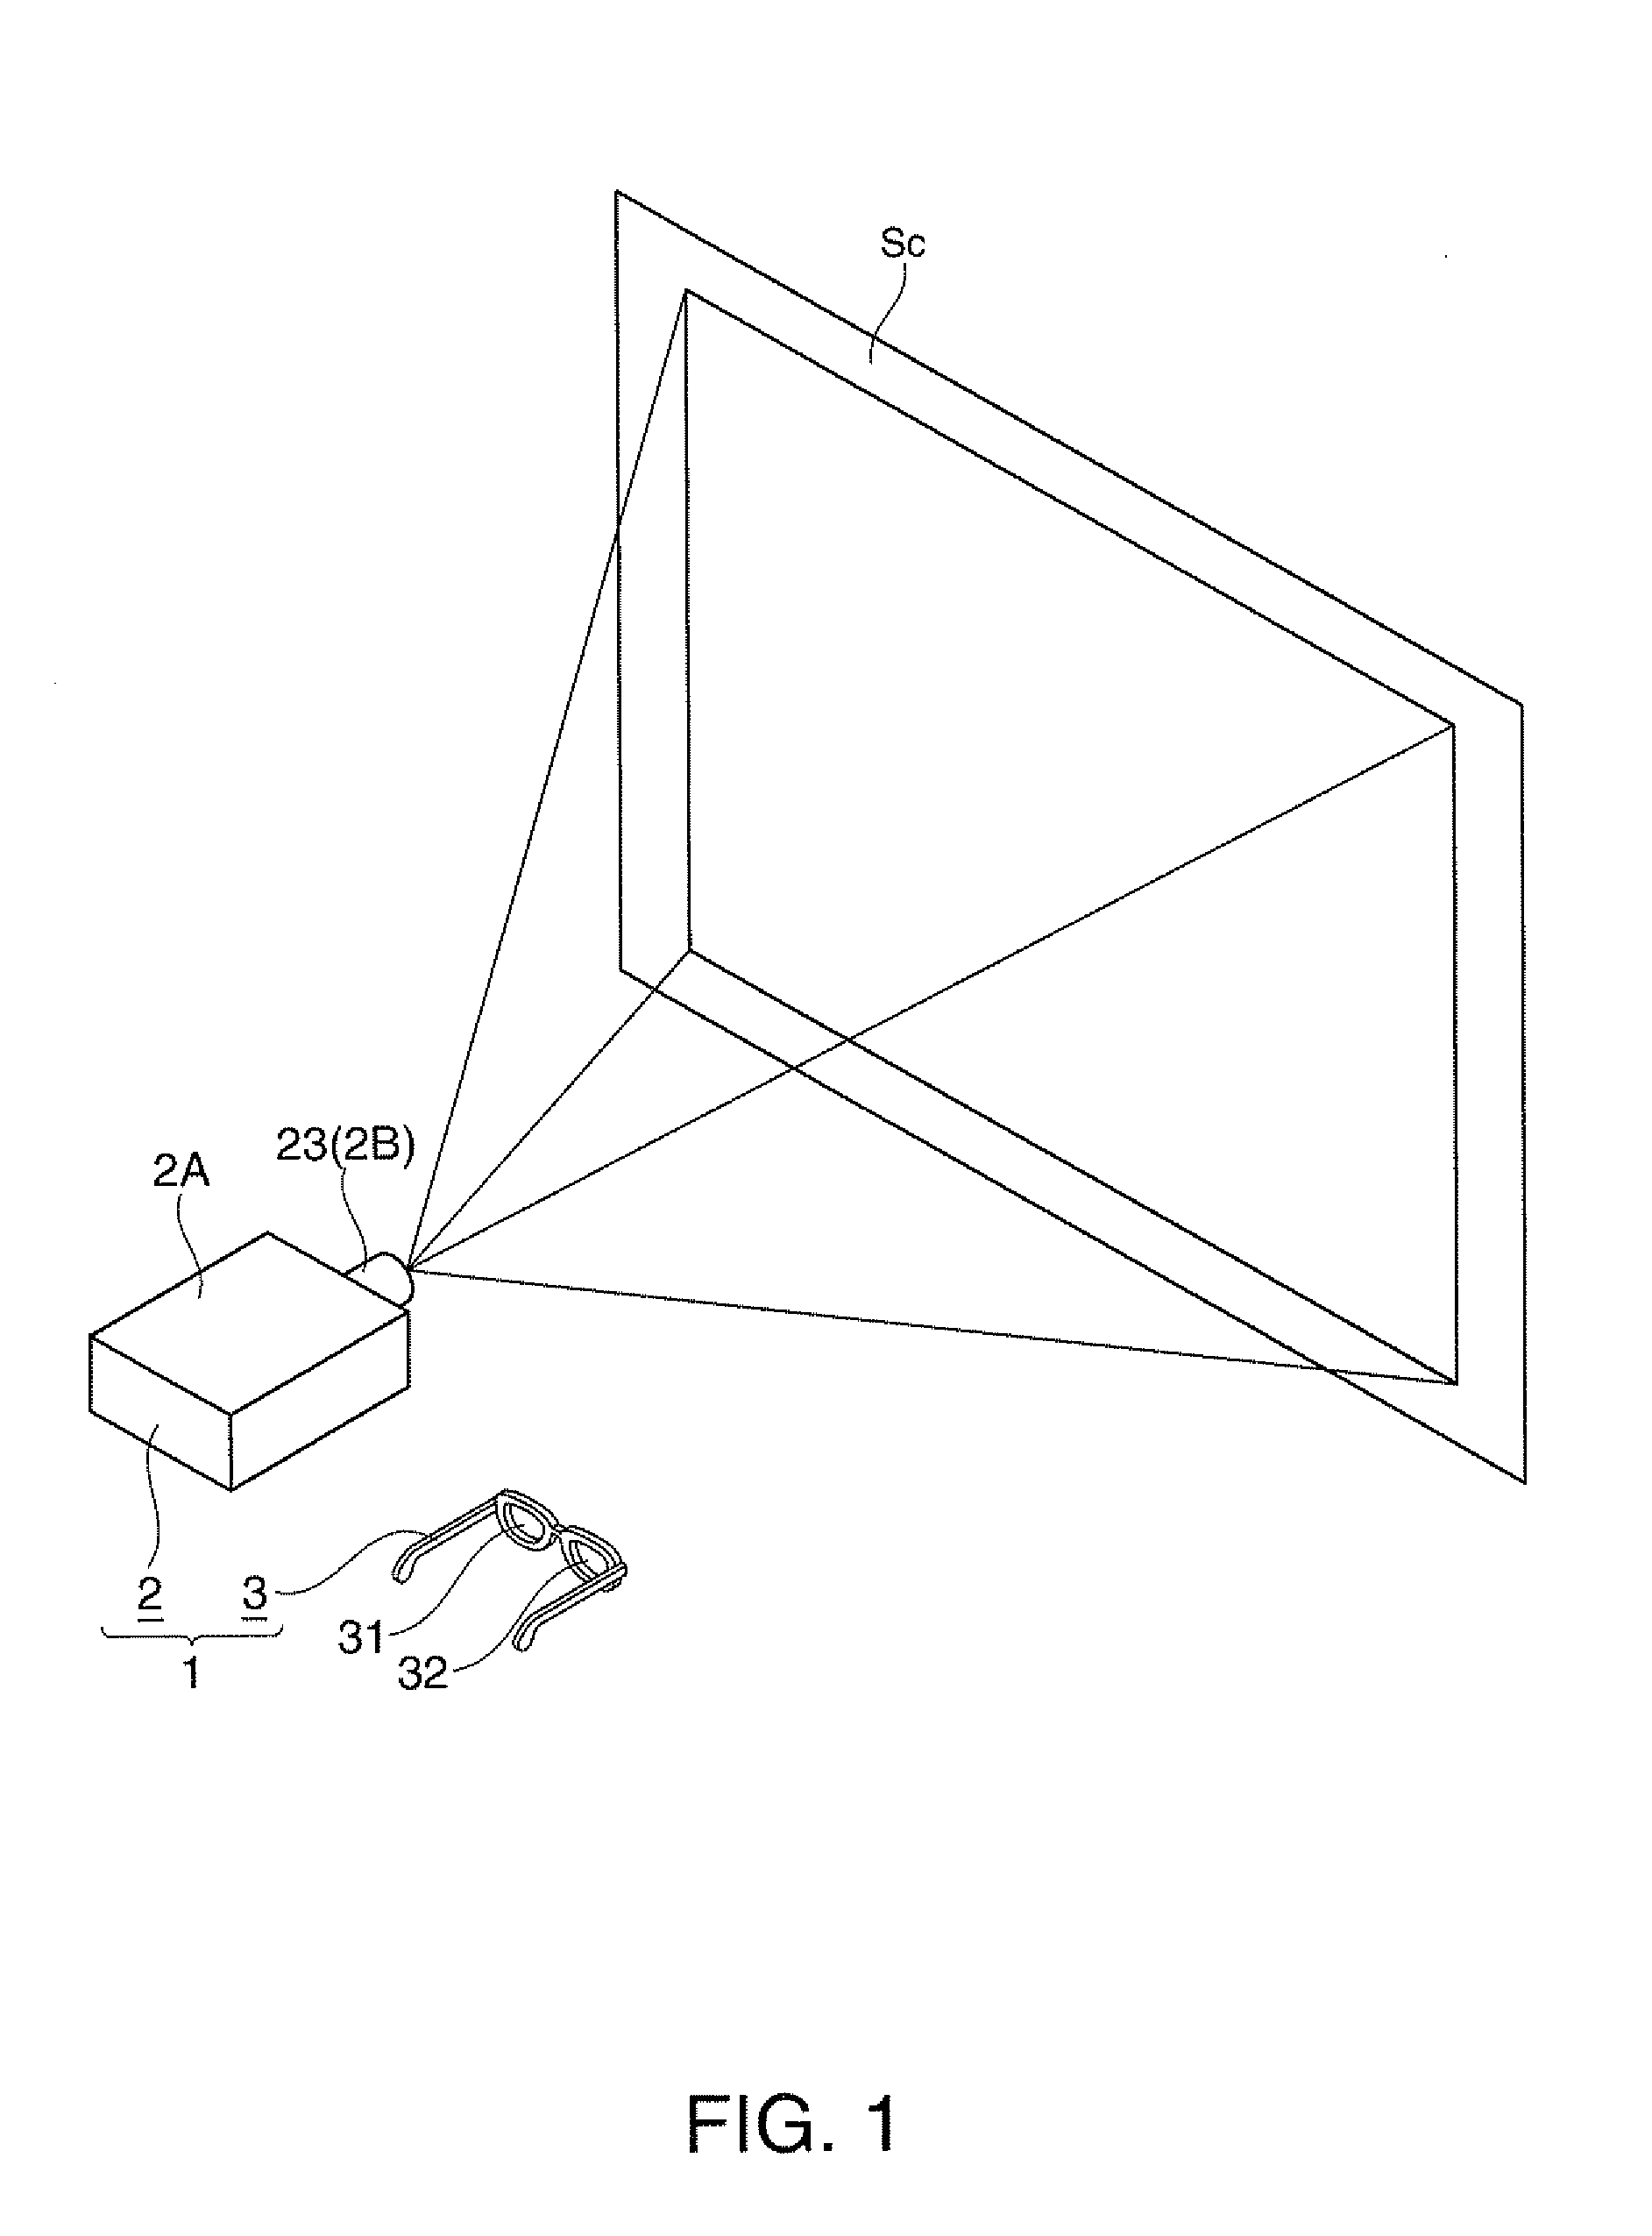 Image display apparatus and image display system